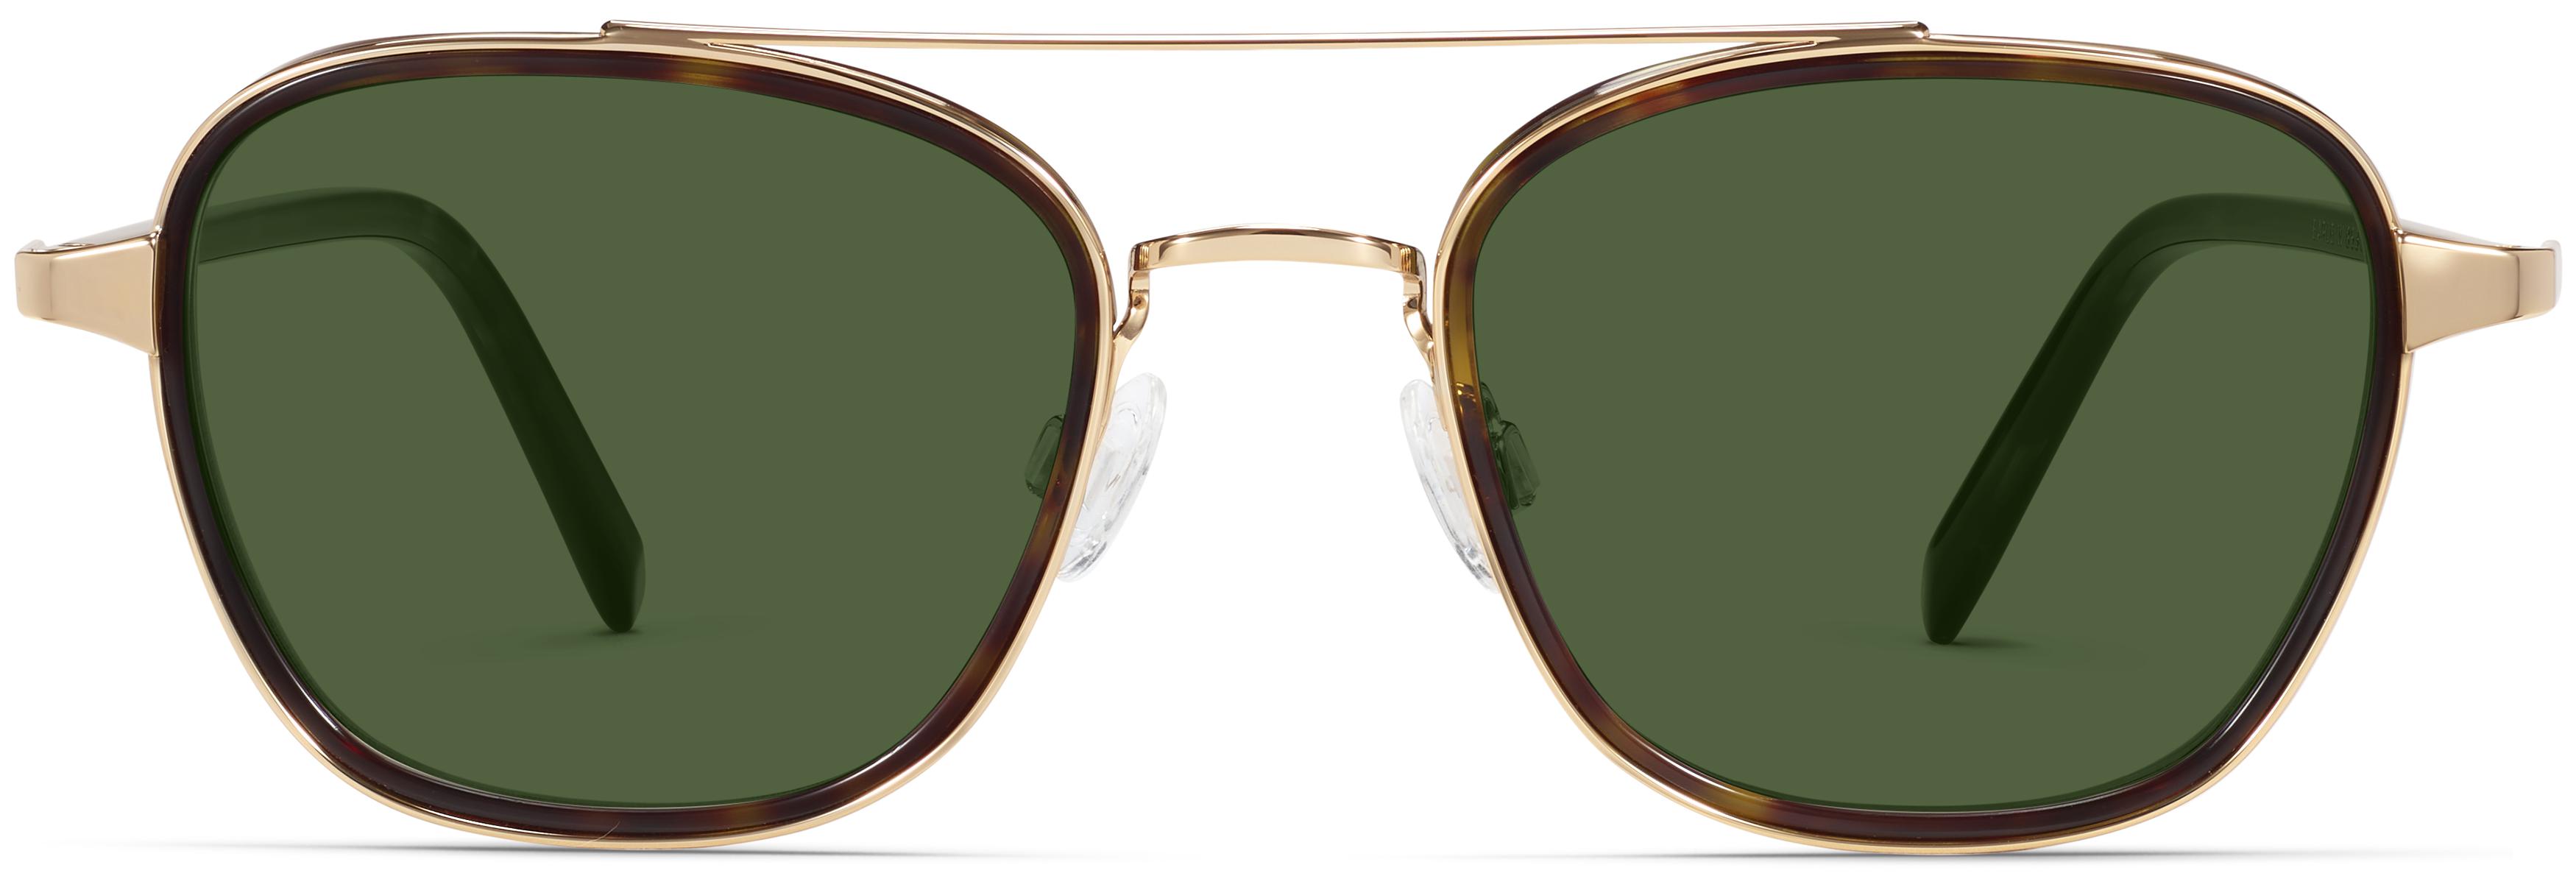 Earle Cognac Tortoise with Polished Gold